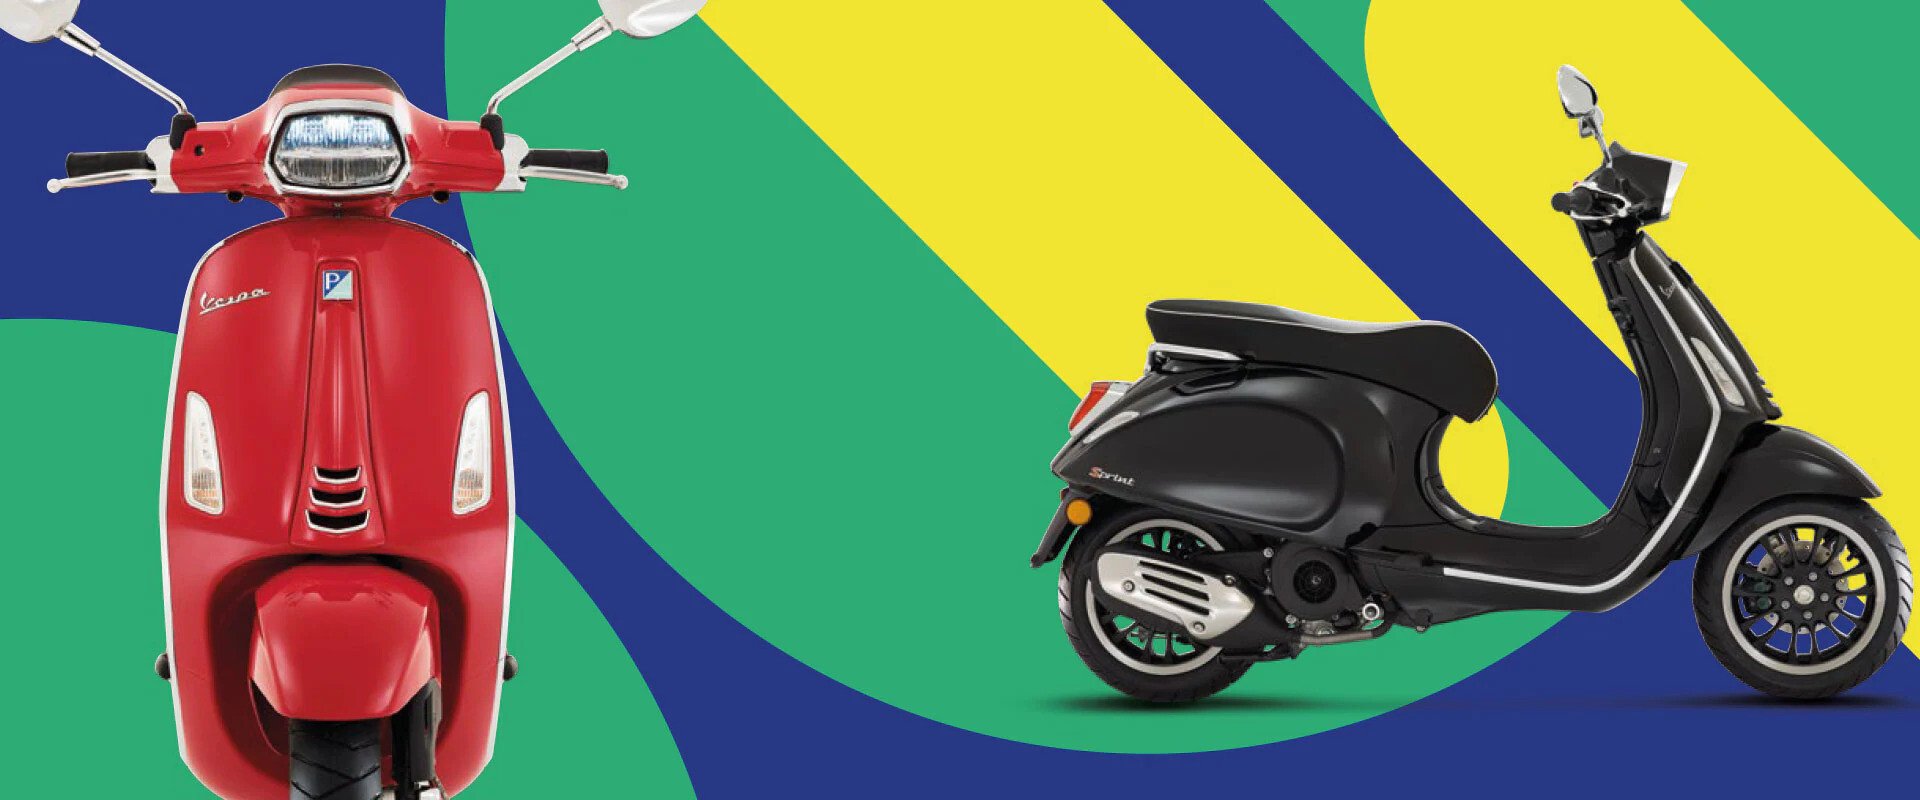 Vespa Scooter Buying Guide - Motorcycles on Autotrader